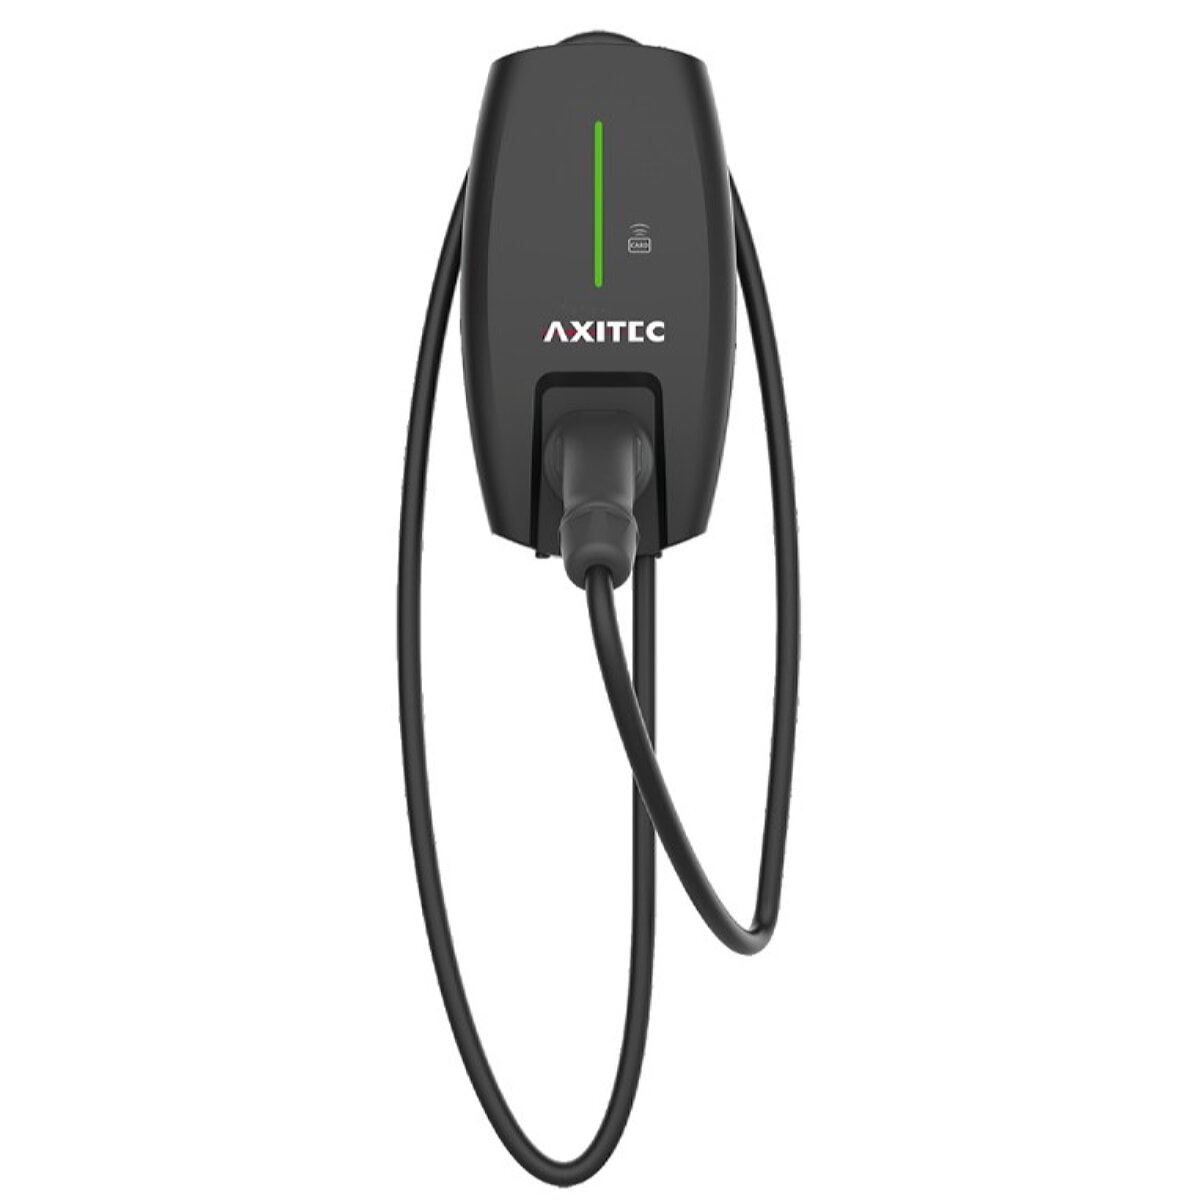 AXITEC Axibox 11K, EV charger with type 2 plug, 7.0 m charging cable